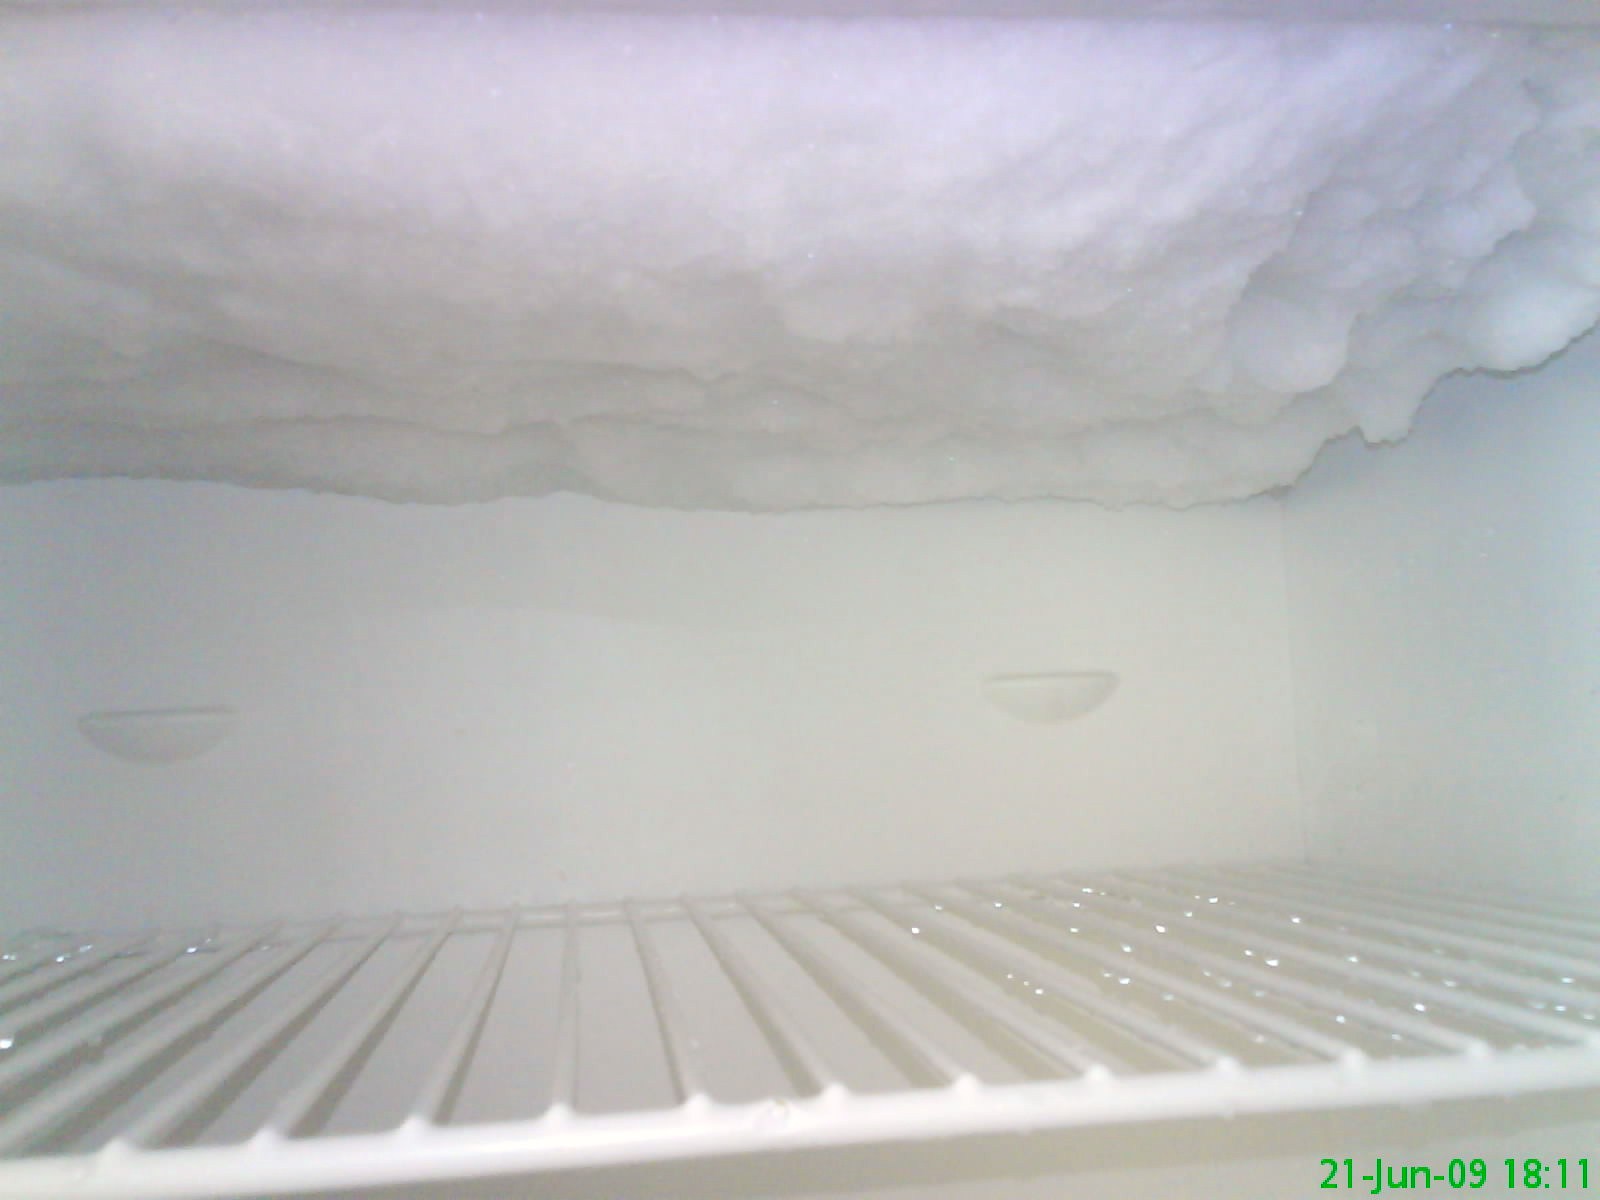 [Freezer+encrusted+with+frost+and+ice.JPG]